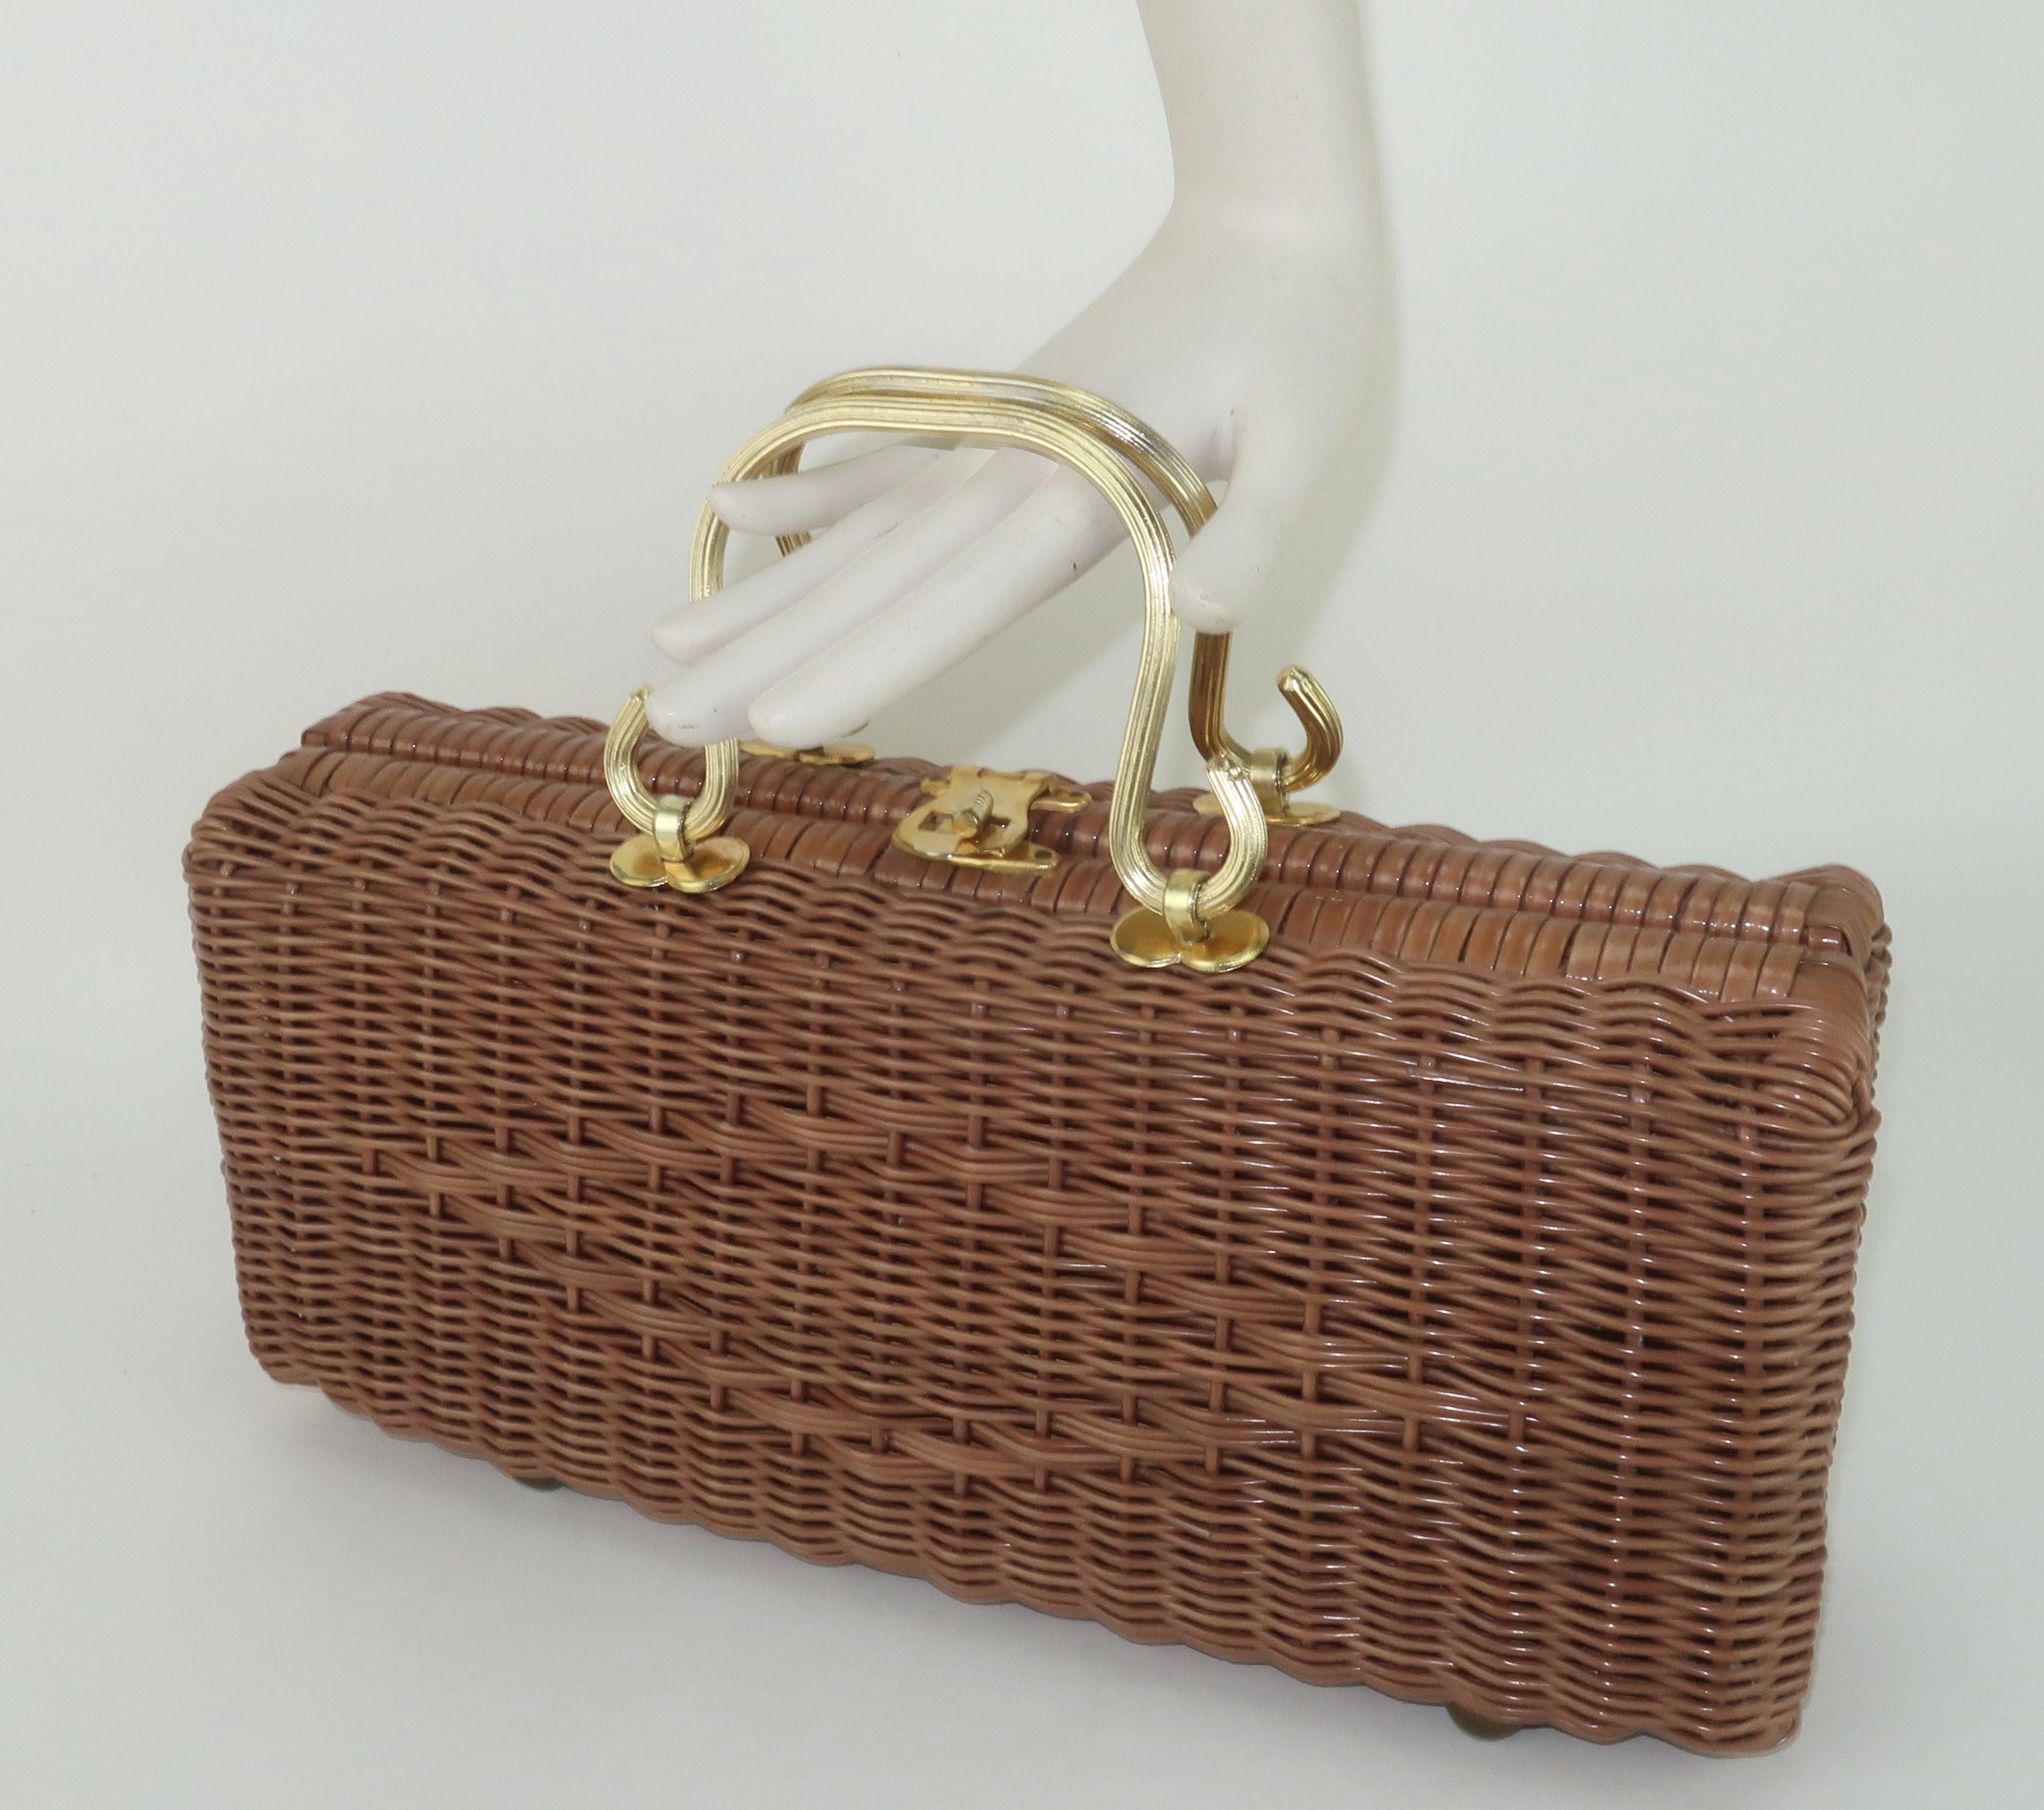 Elongated Straw Handbag With Gold Handles, 1960's For Sale 8